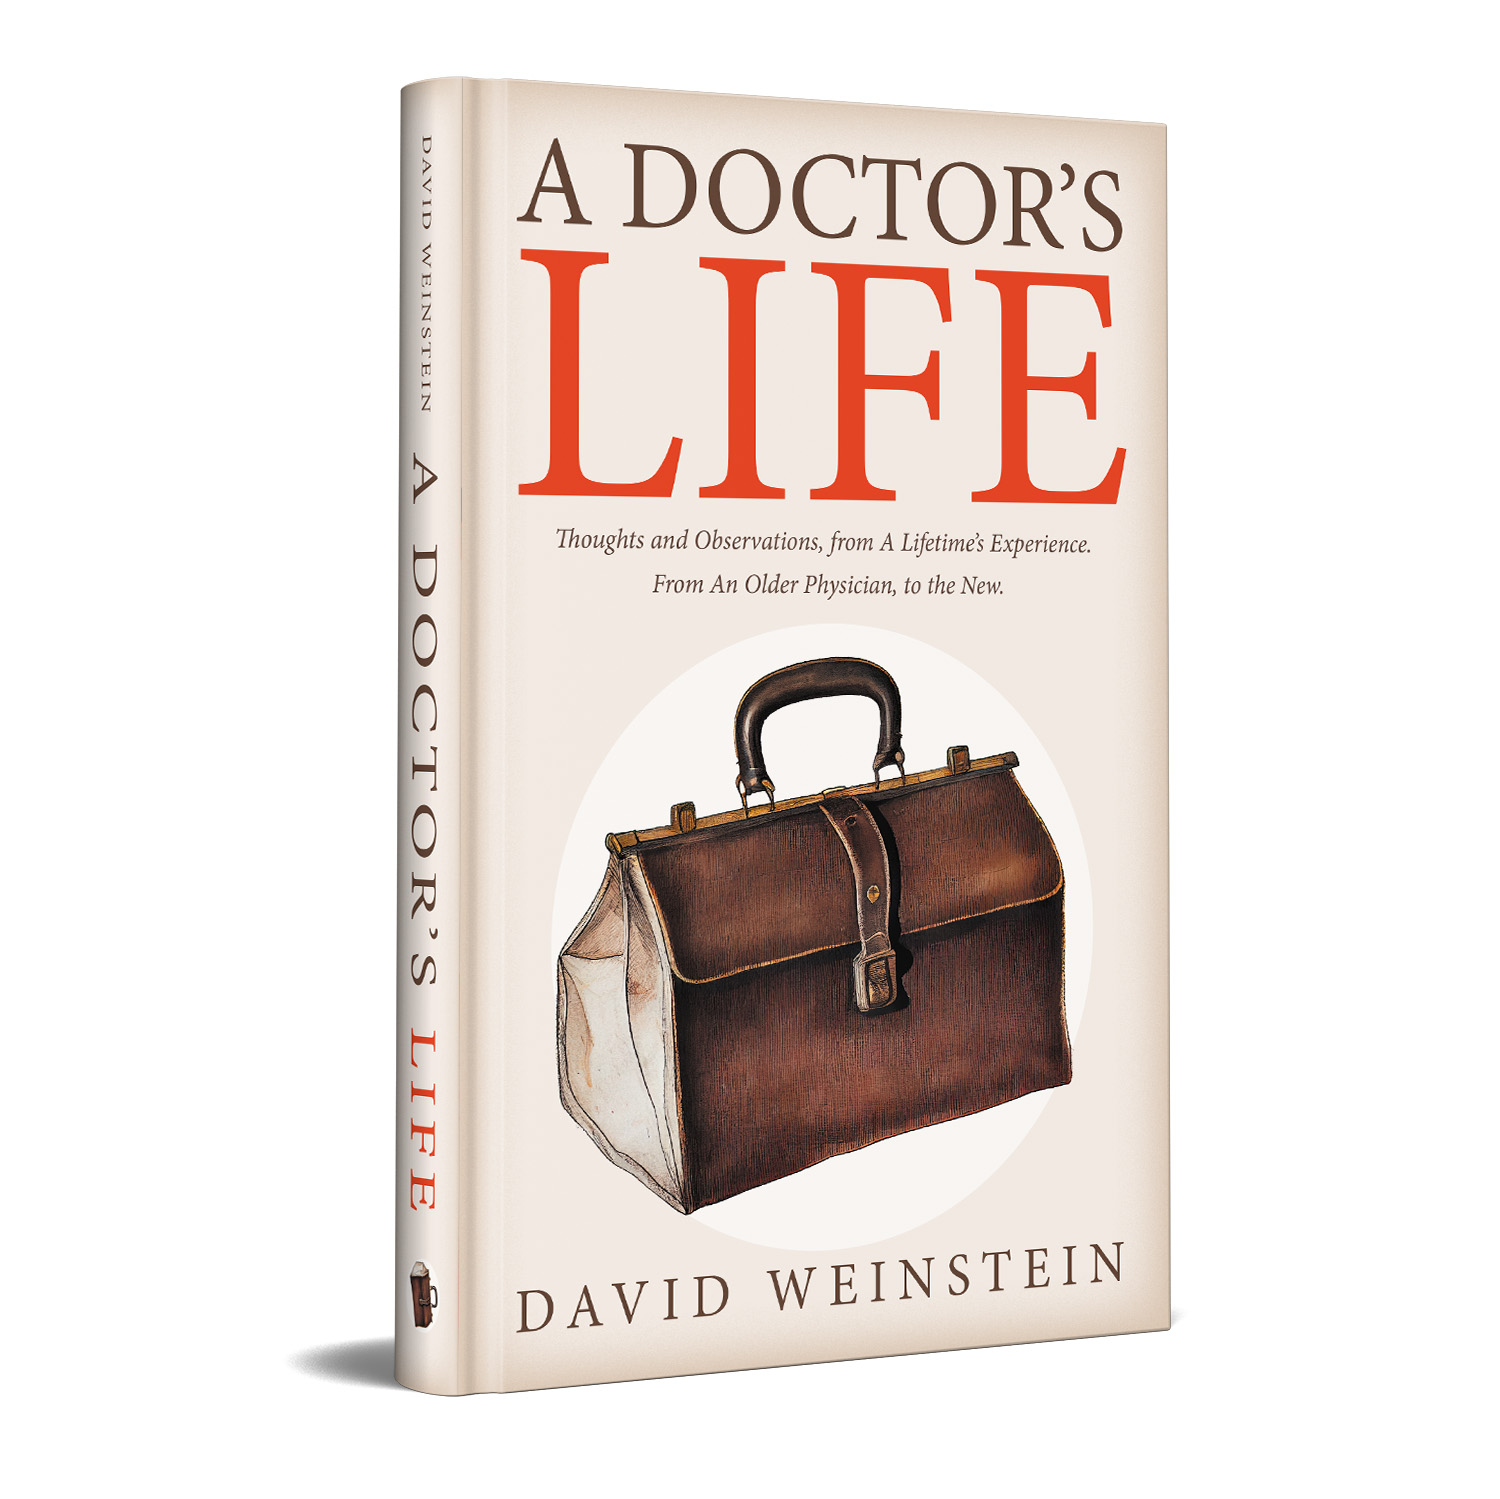 'A Doctor's Life' is a heartfelt and insightful memoir on a life in the medical profession. The author is David Weinstein. The book cover and interior formatting are designed by Mark Thomas of coverness.com. To find out more about my book design services, please visit www.coverness.com